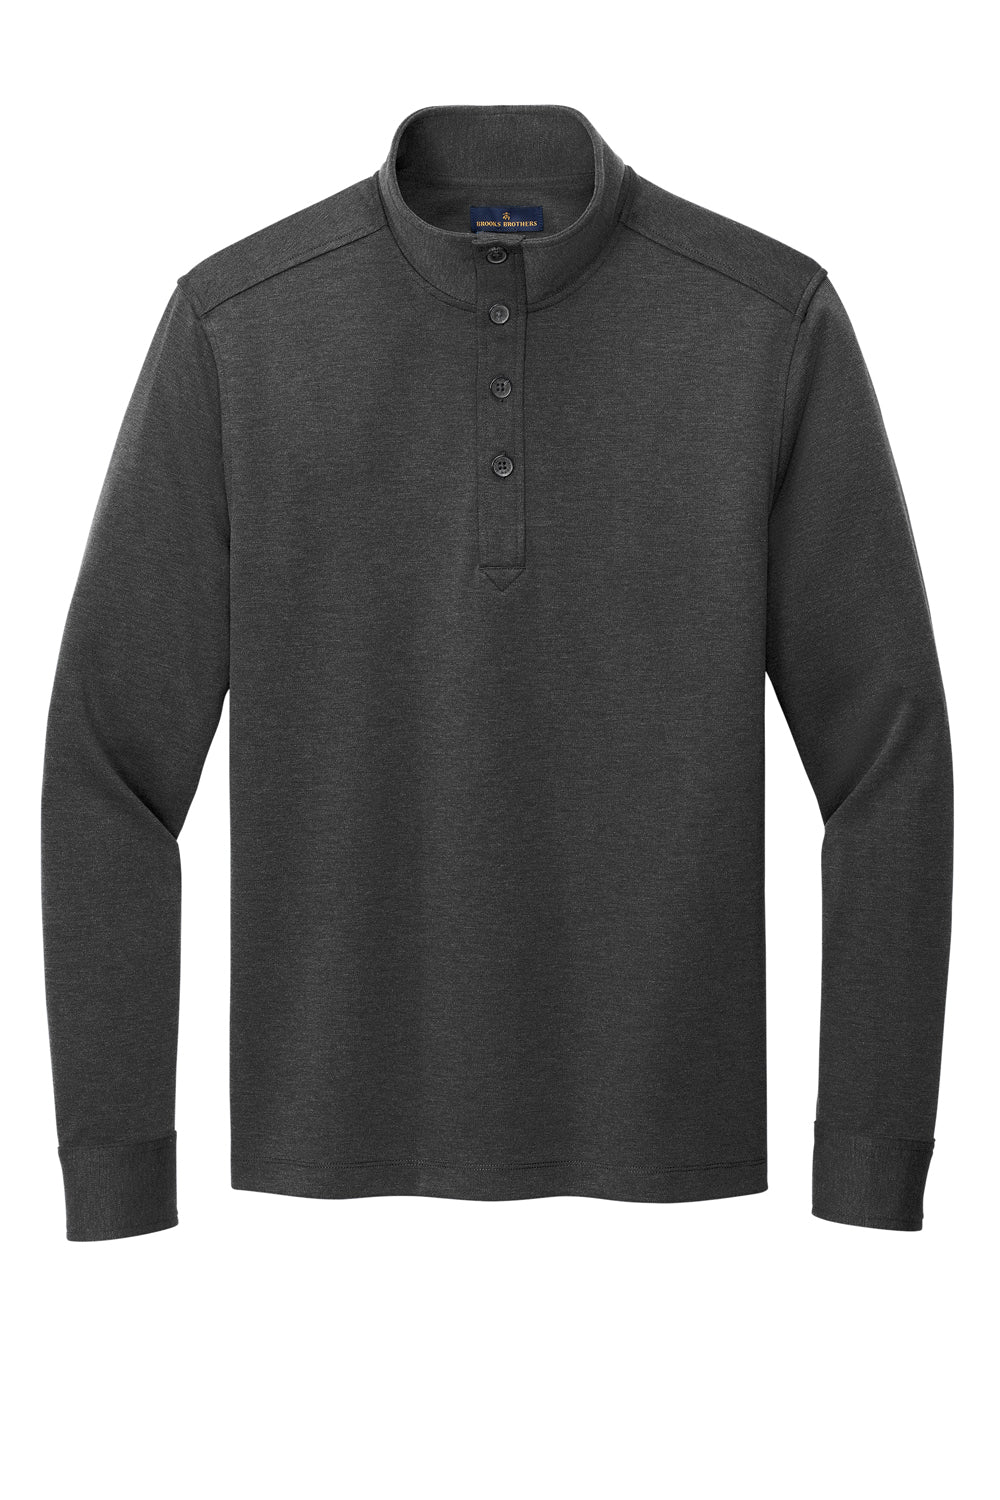 Brooks Brothers Mens 1/4 Button Down Sweatshirt Heather Windsor Grey Flat Front